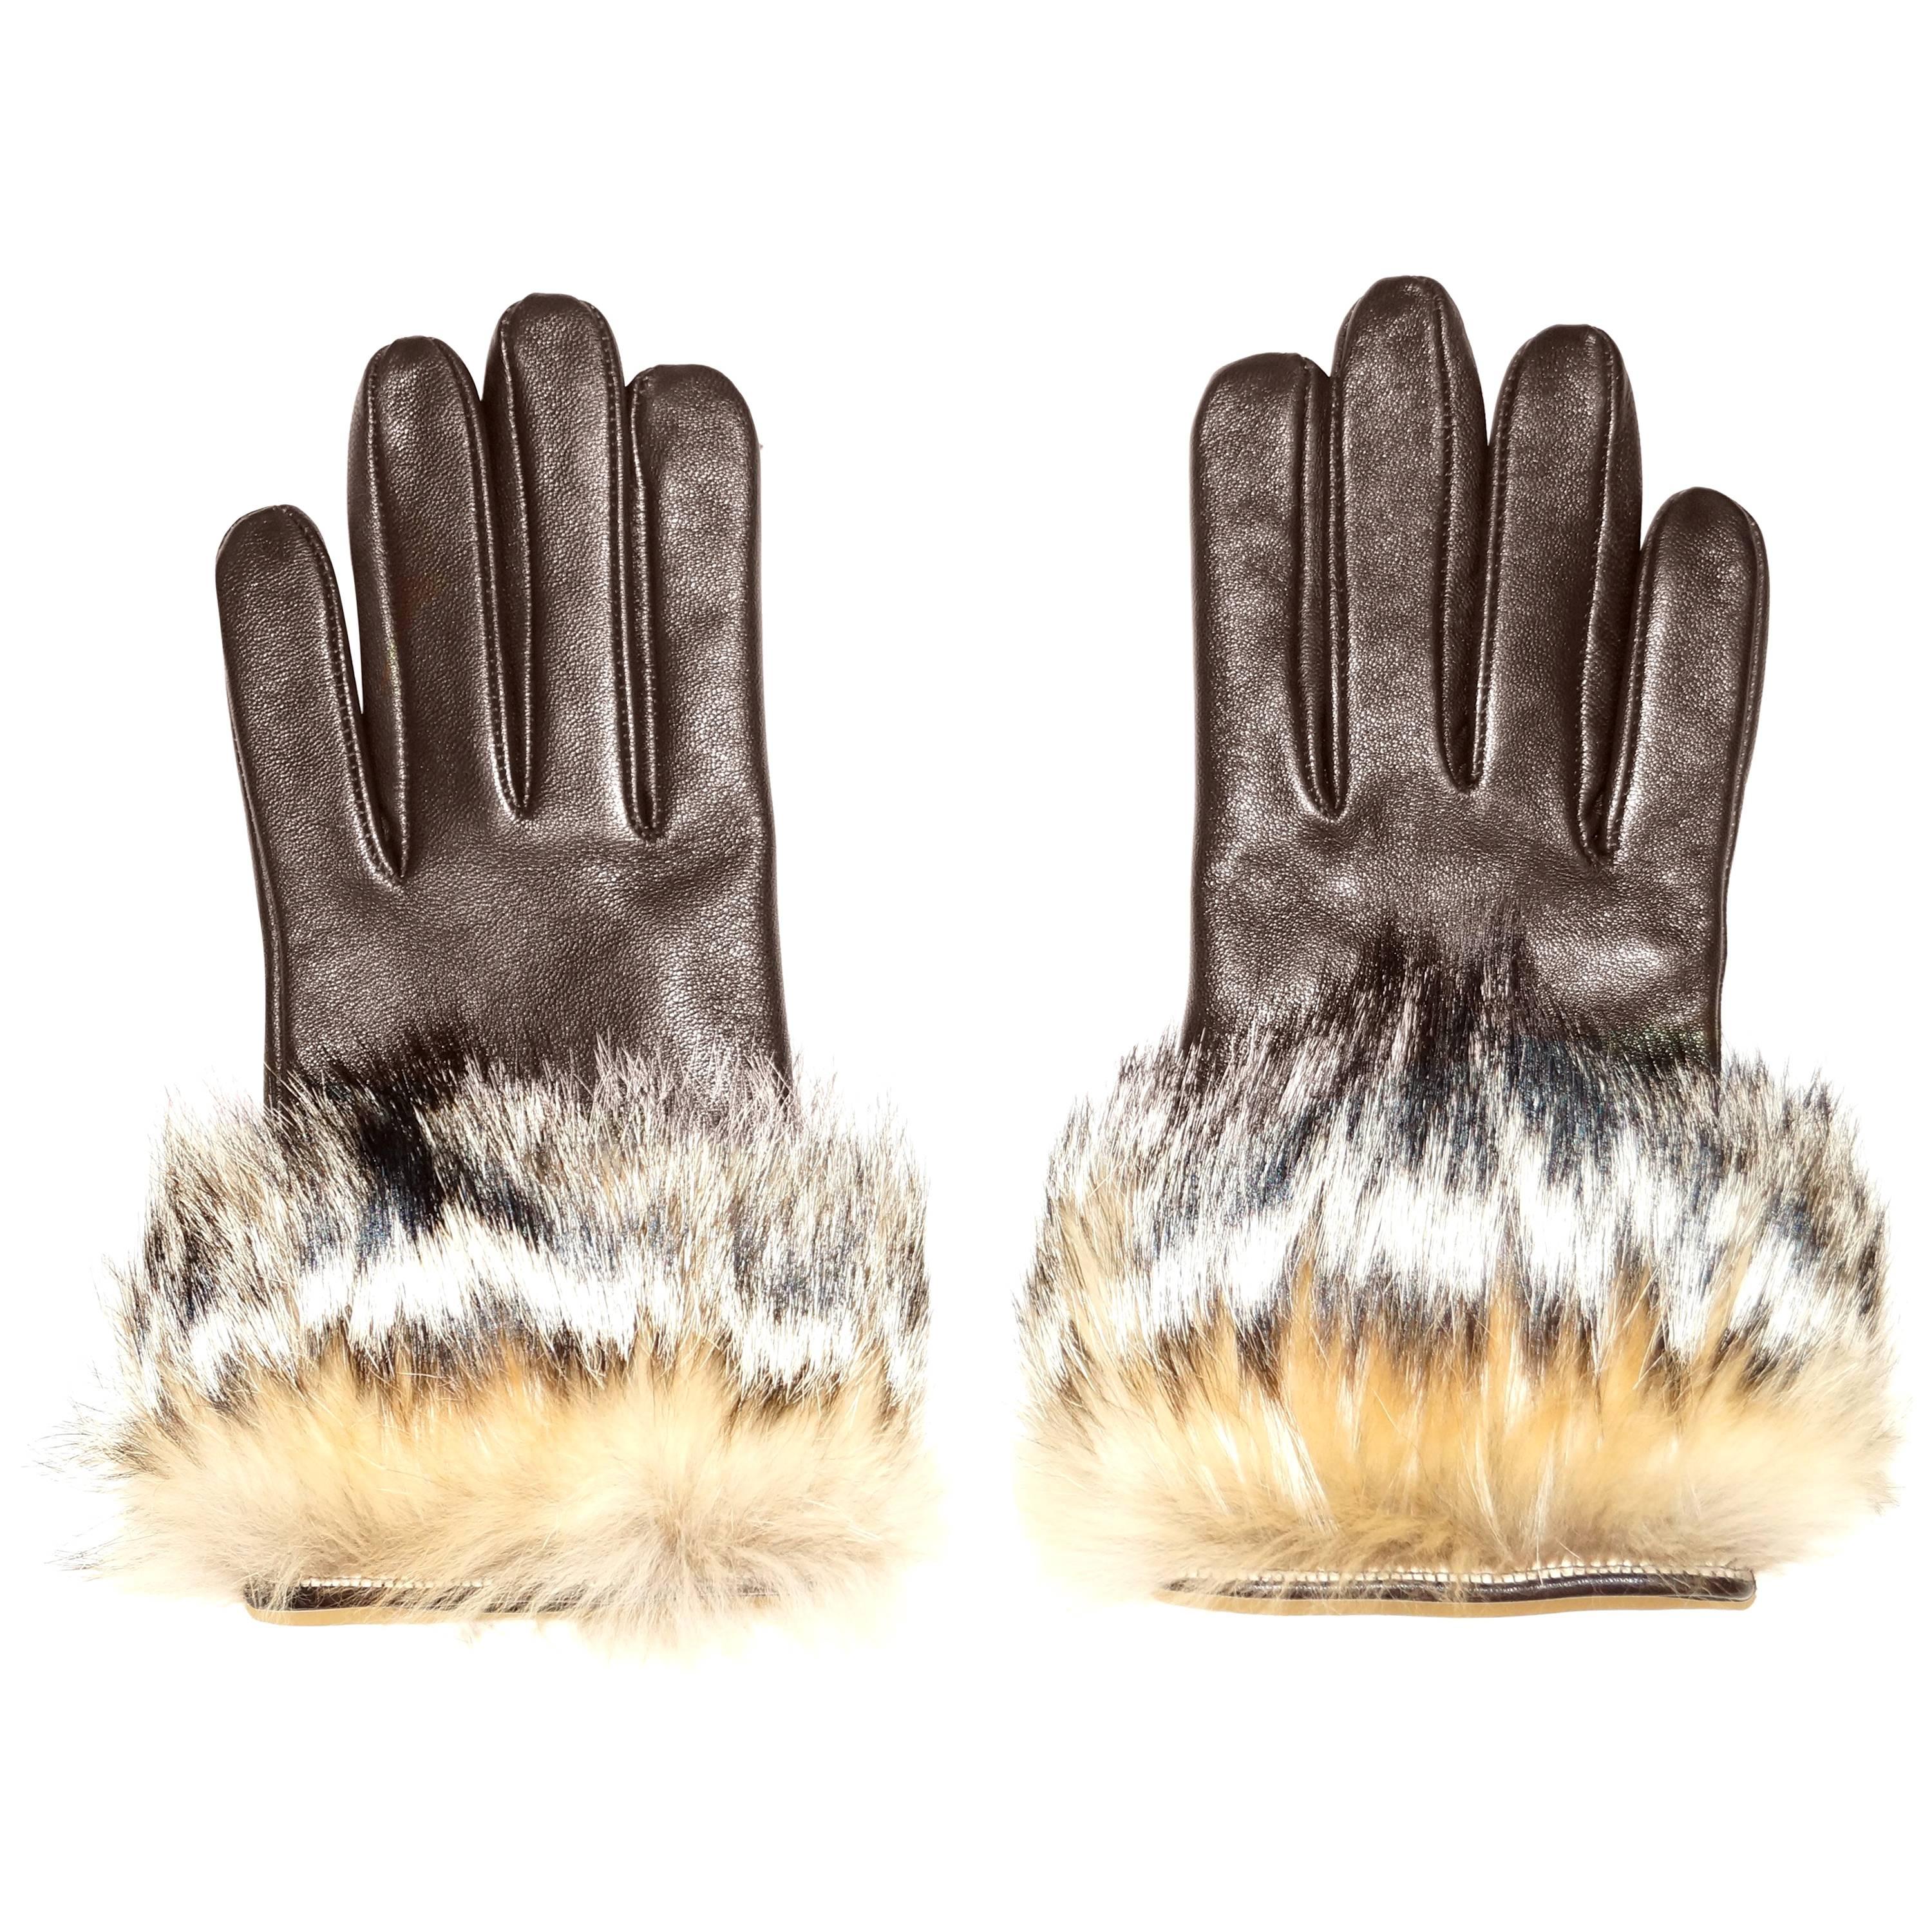 Vintage Italian Brown Leather Gloves with Fur Cuffs